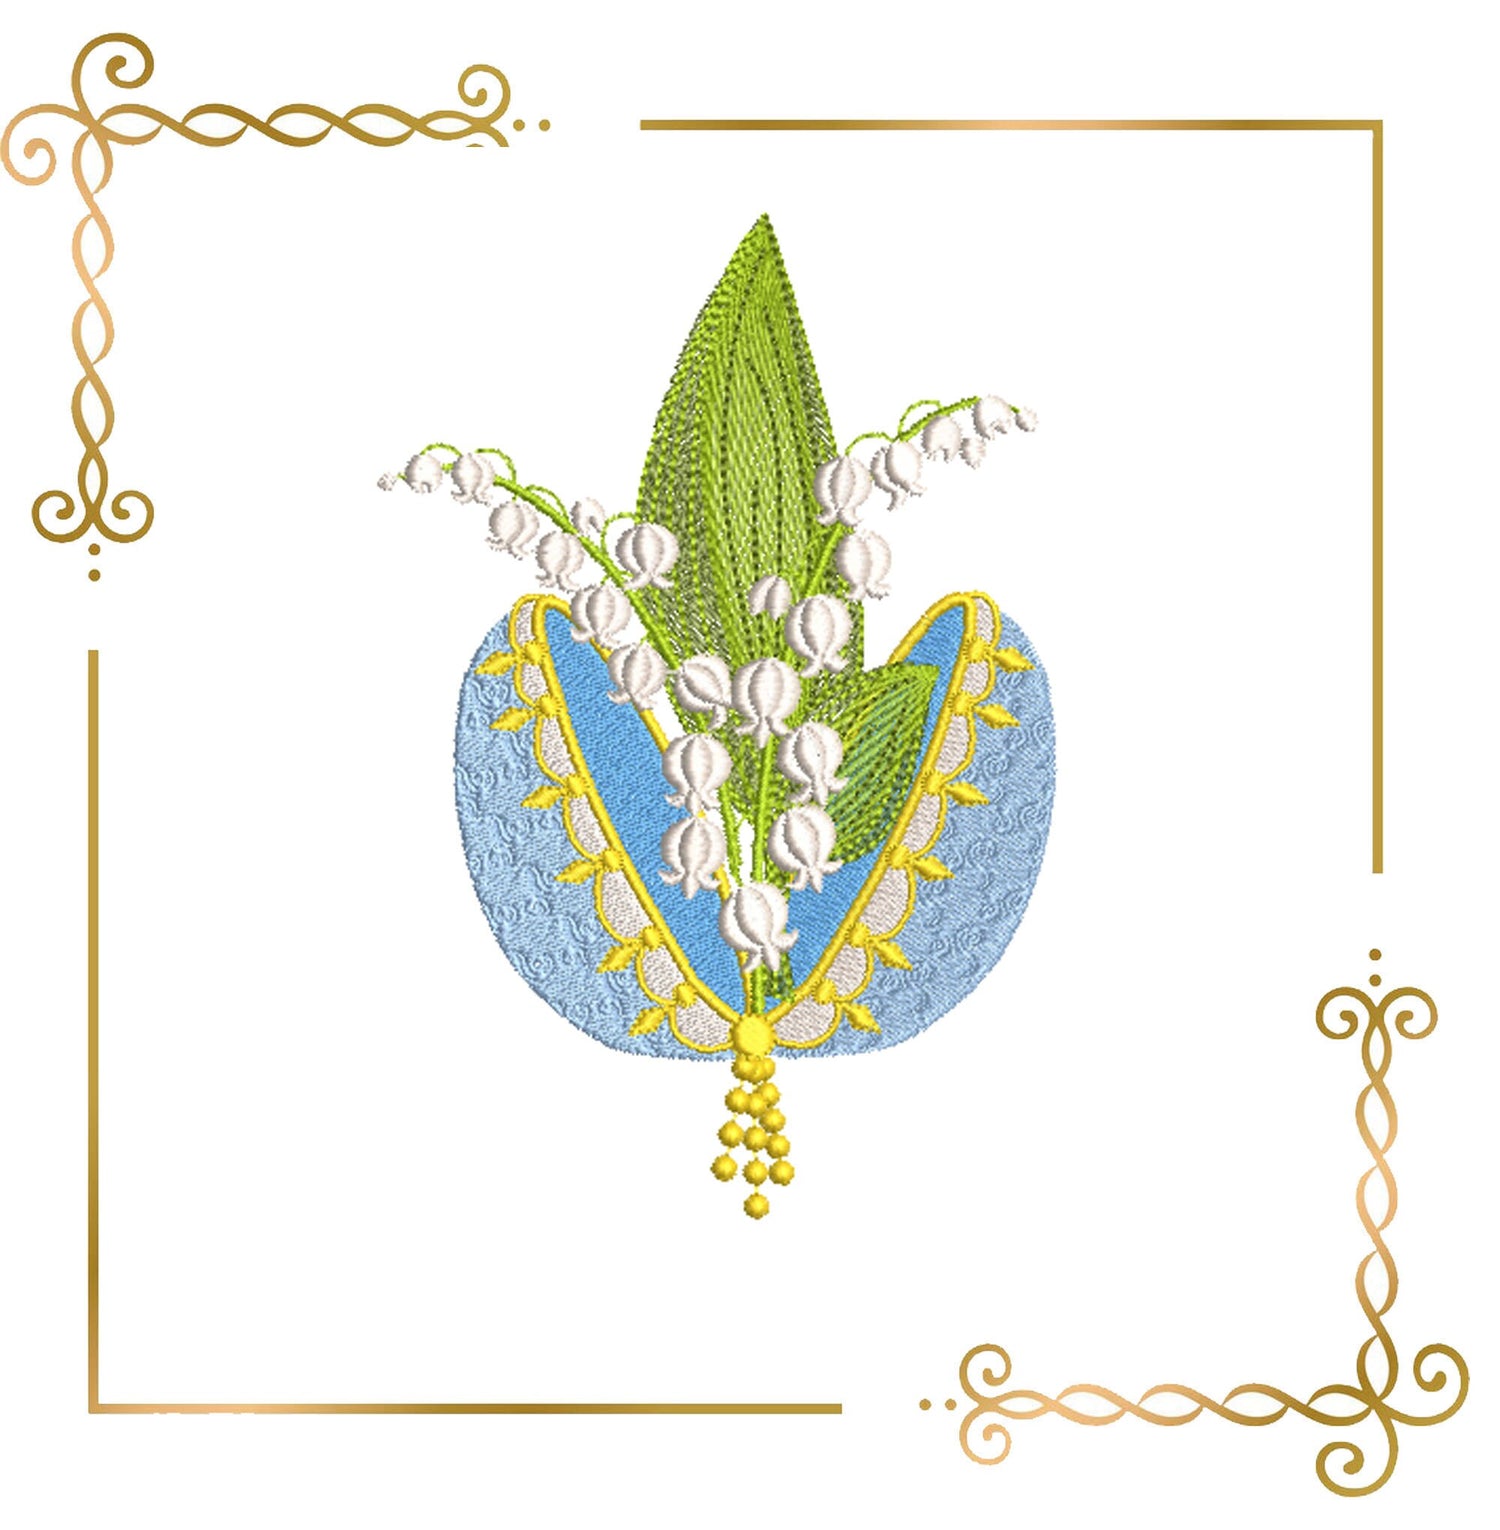 Lily Of The Valley Designs for Embroidery Machines